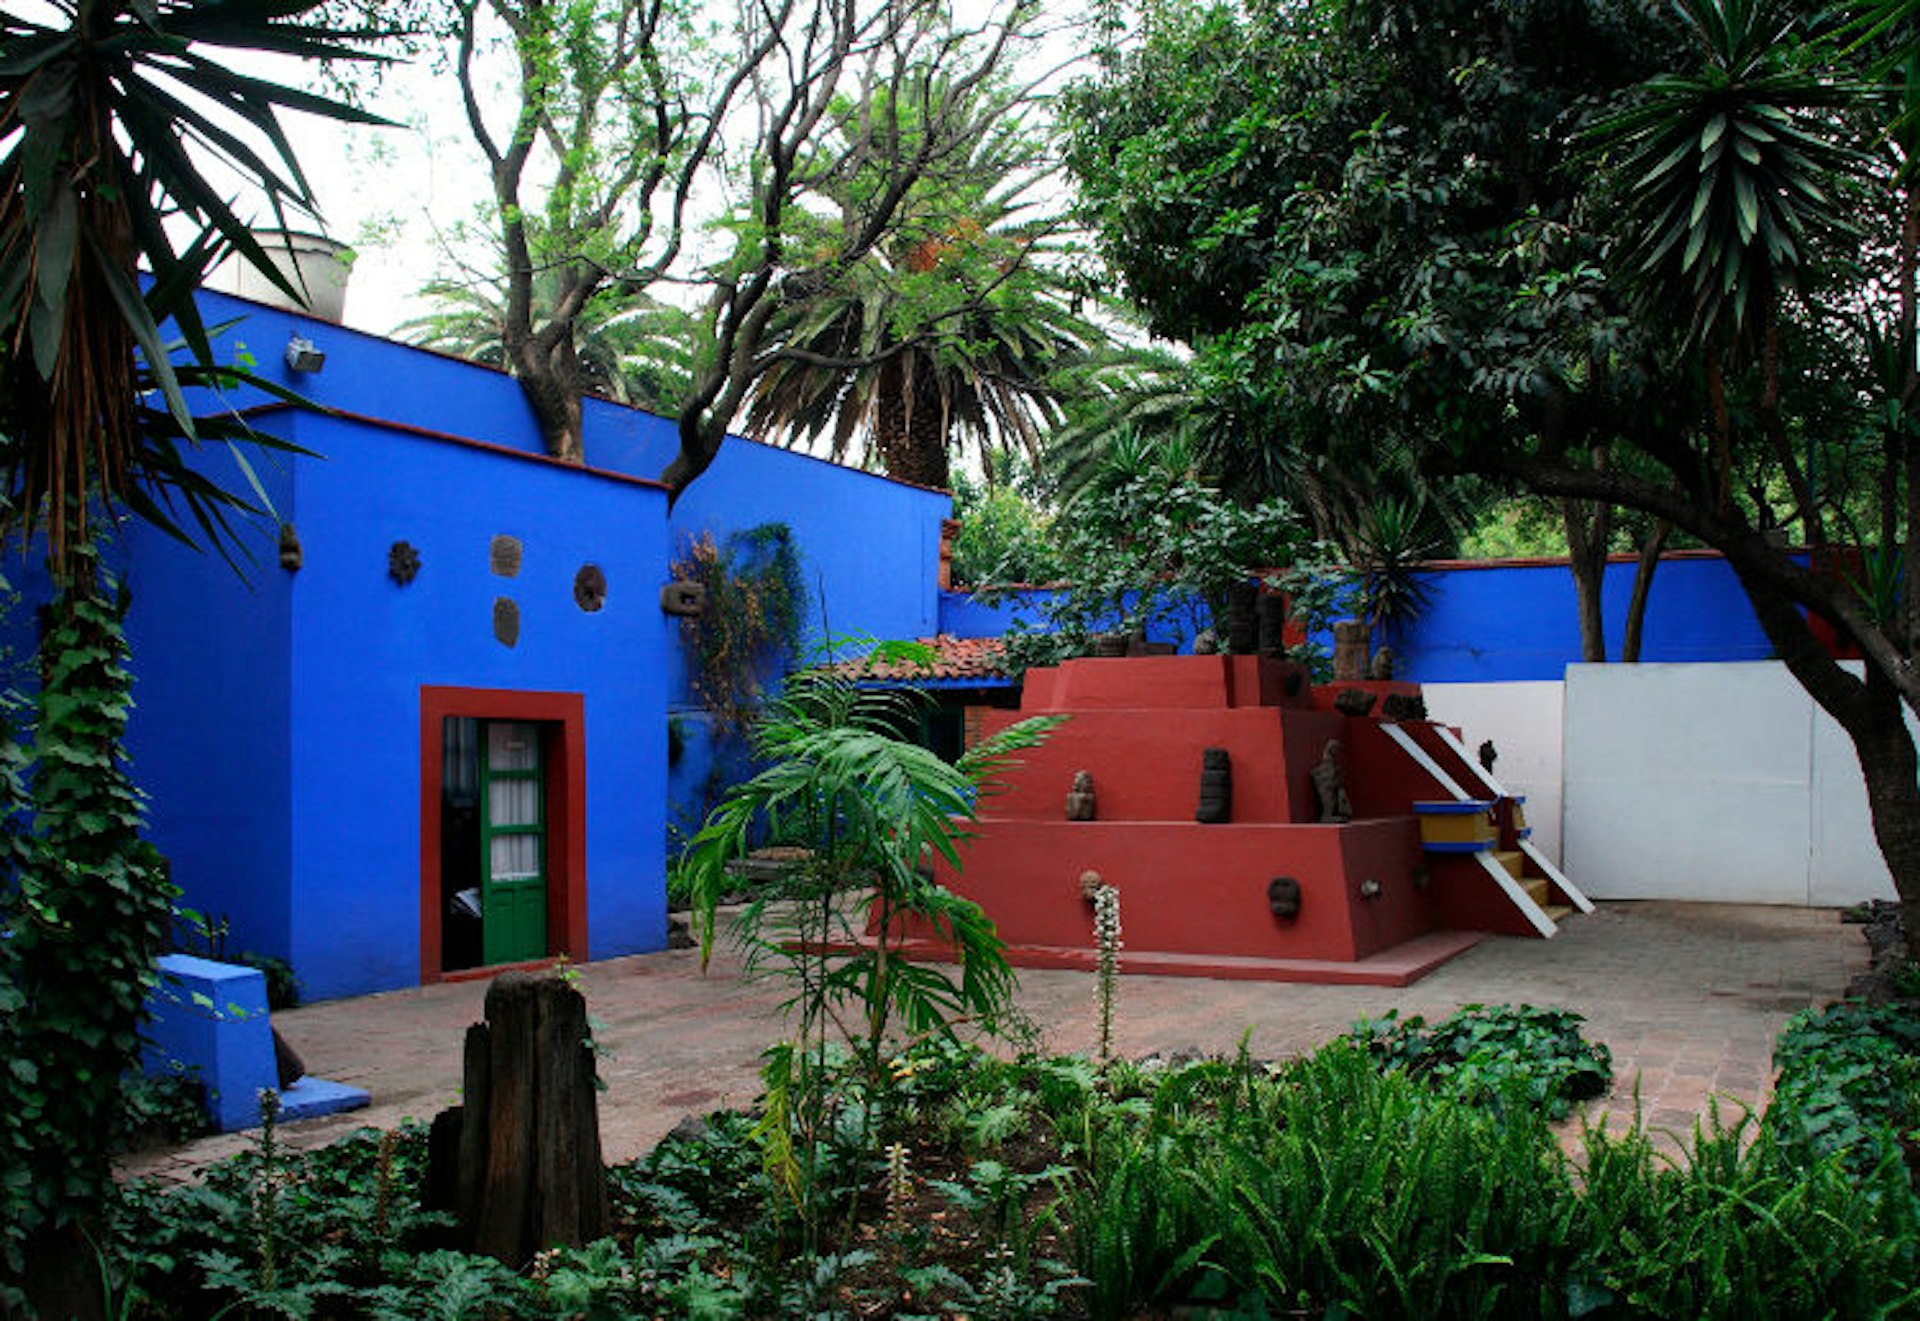 Frida Kahlo's former home is now a museum showcasing her life and work. Image by David Banks / Getty Images